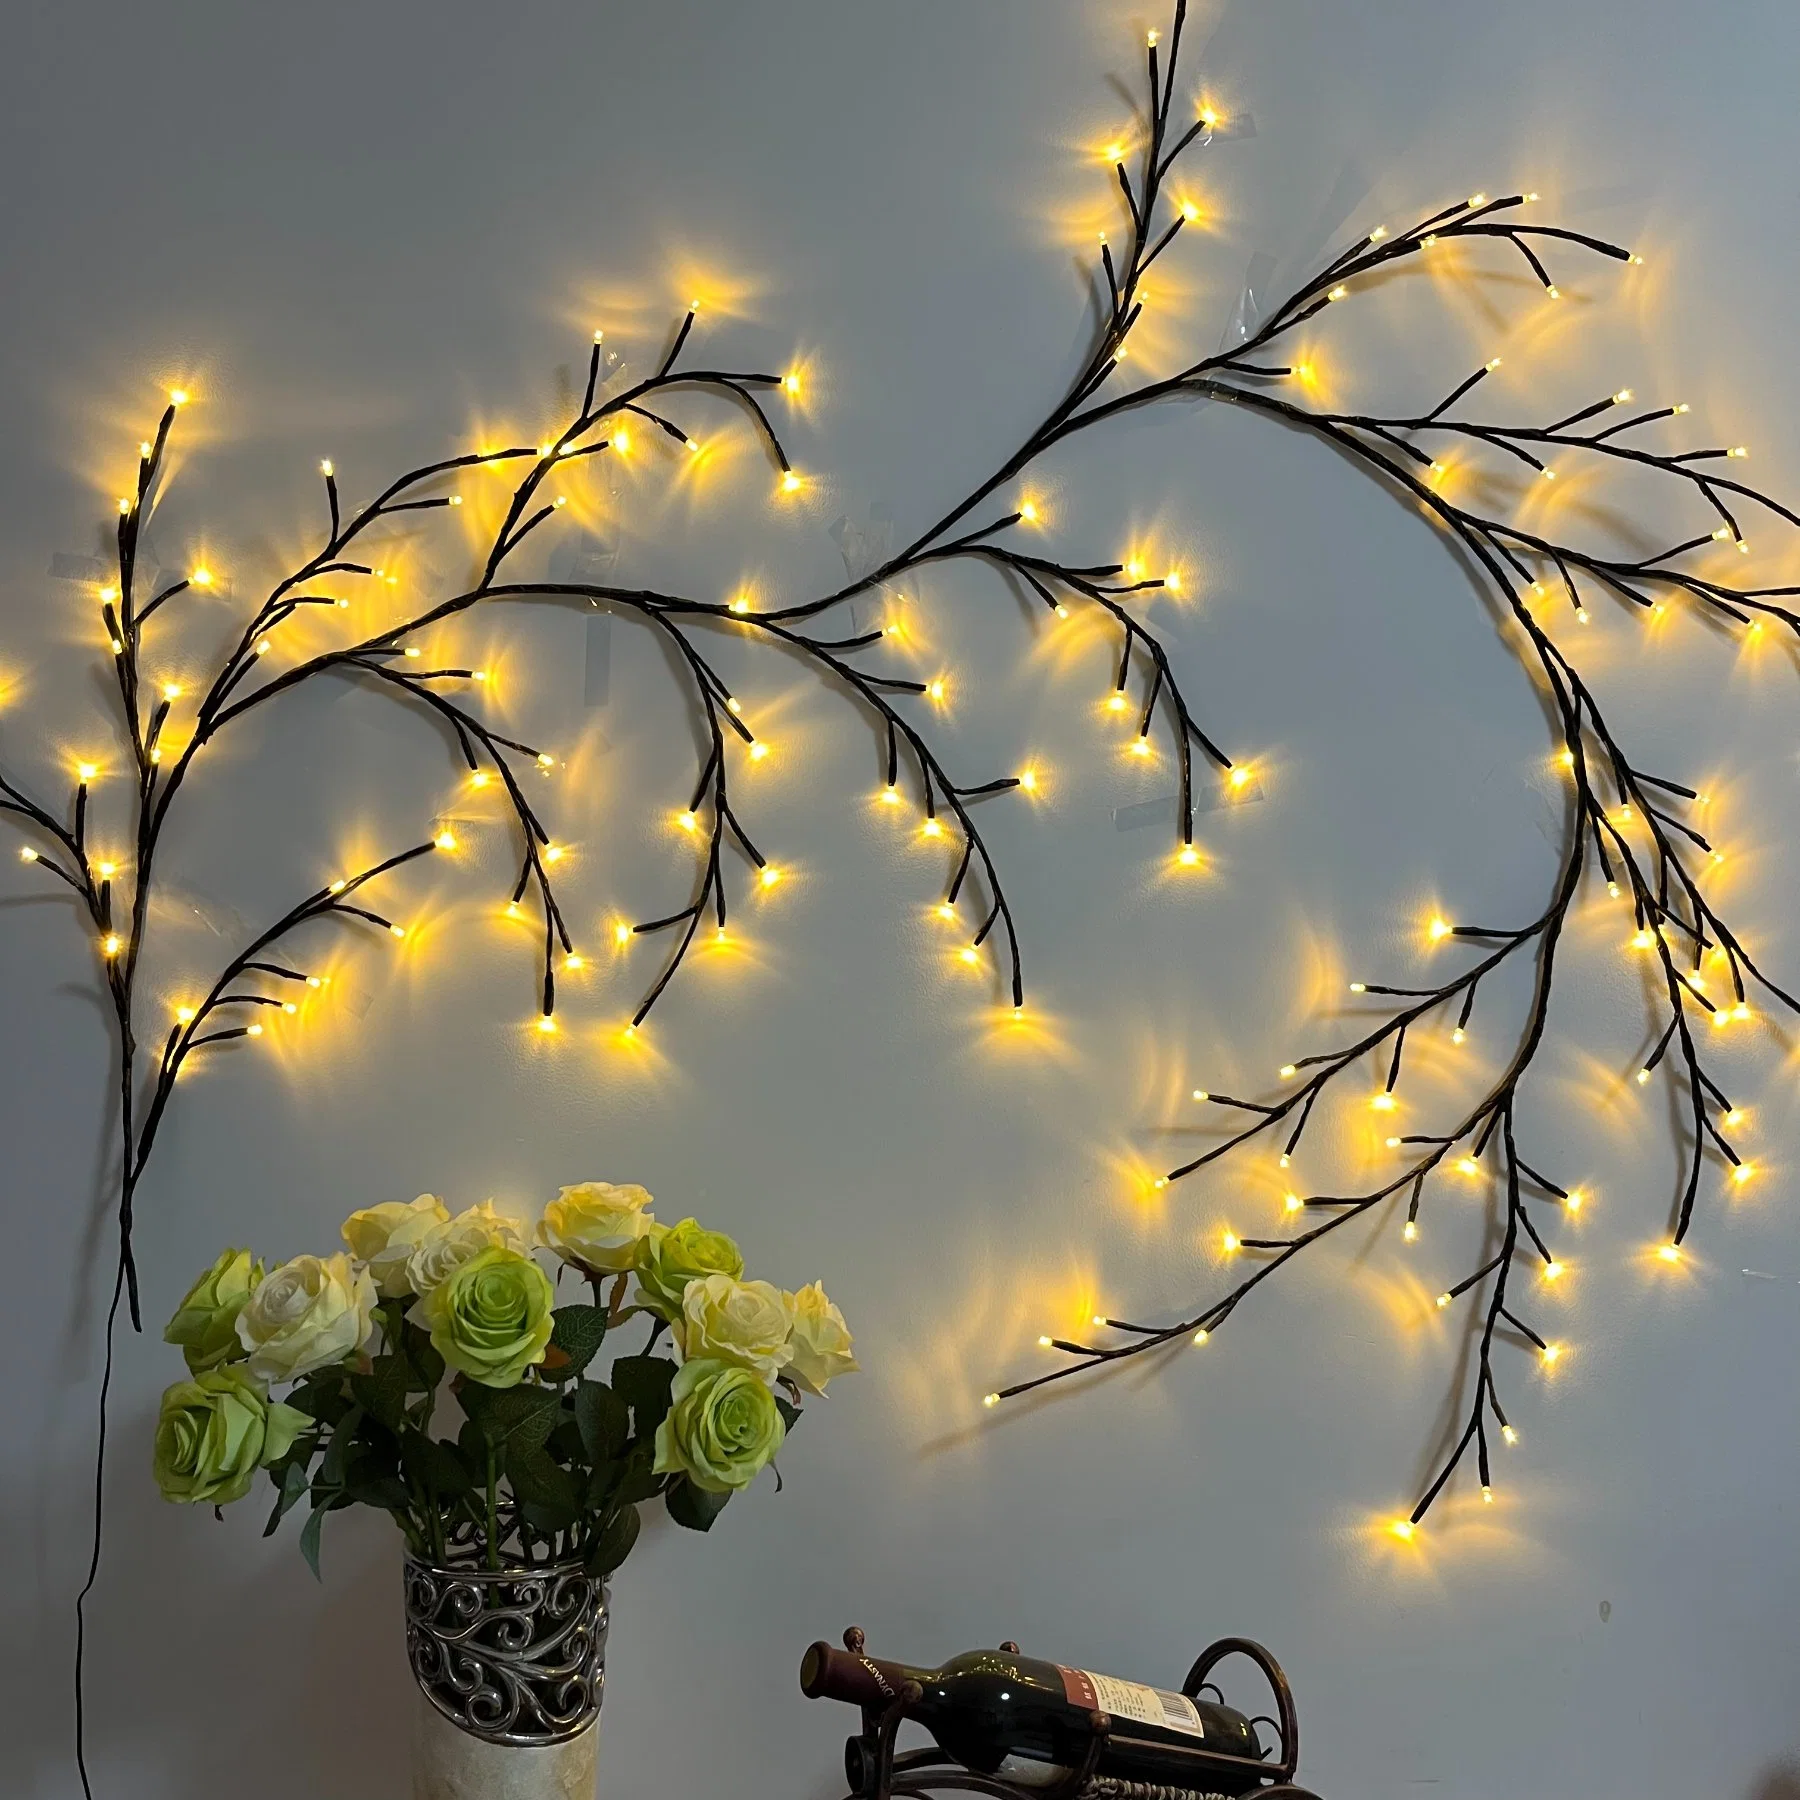 LED String Light for Christmas Garden Decoration and More